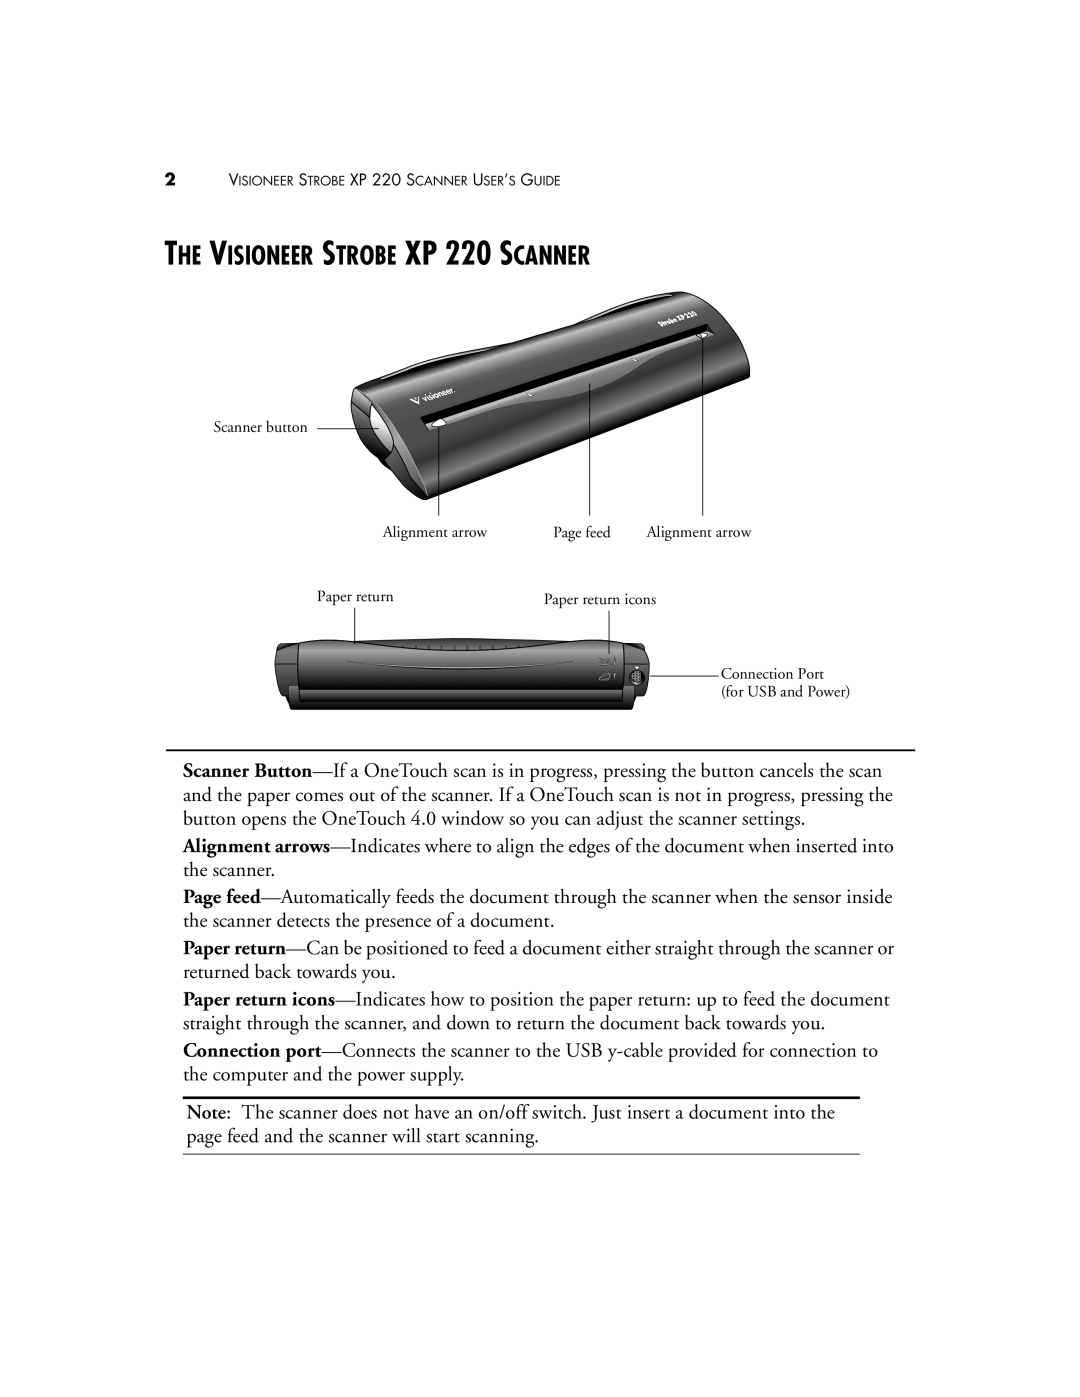 Visioneer XP220 manual THE VISIONEER STROBE XP 220 SCANNER, Scanner button, Alignment arrow, Page feed, Paper return 